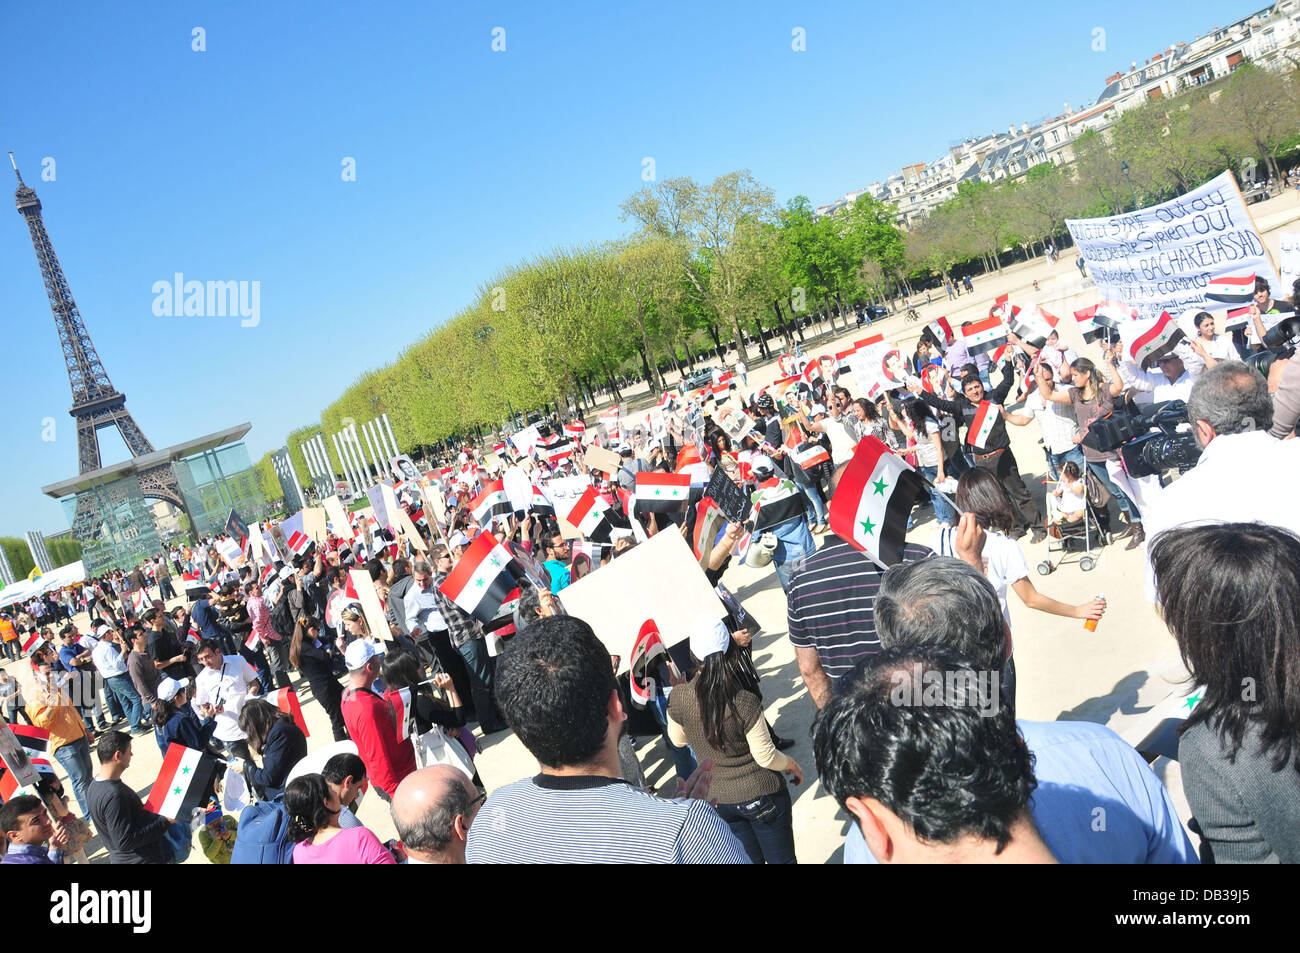 Supporters of Syrian president Bachar al-Assad demonstrate near the Eiffel Tower, Paris, on April 9, 2011. Protestors in Syria Stock Photo